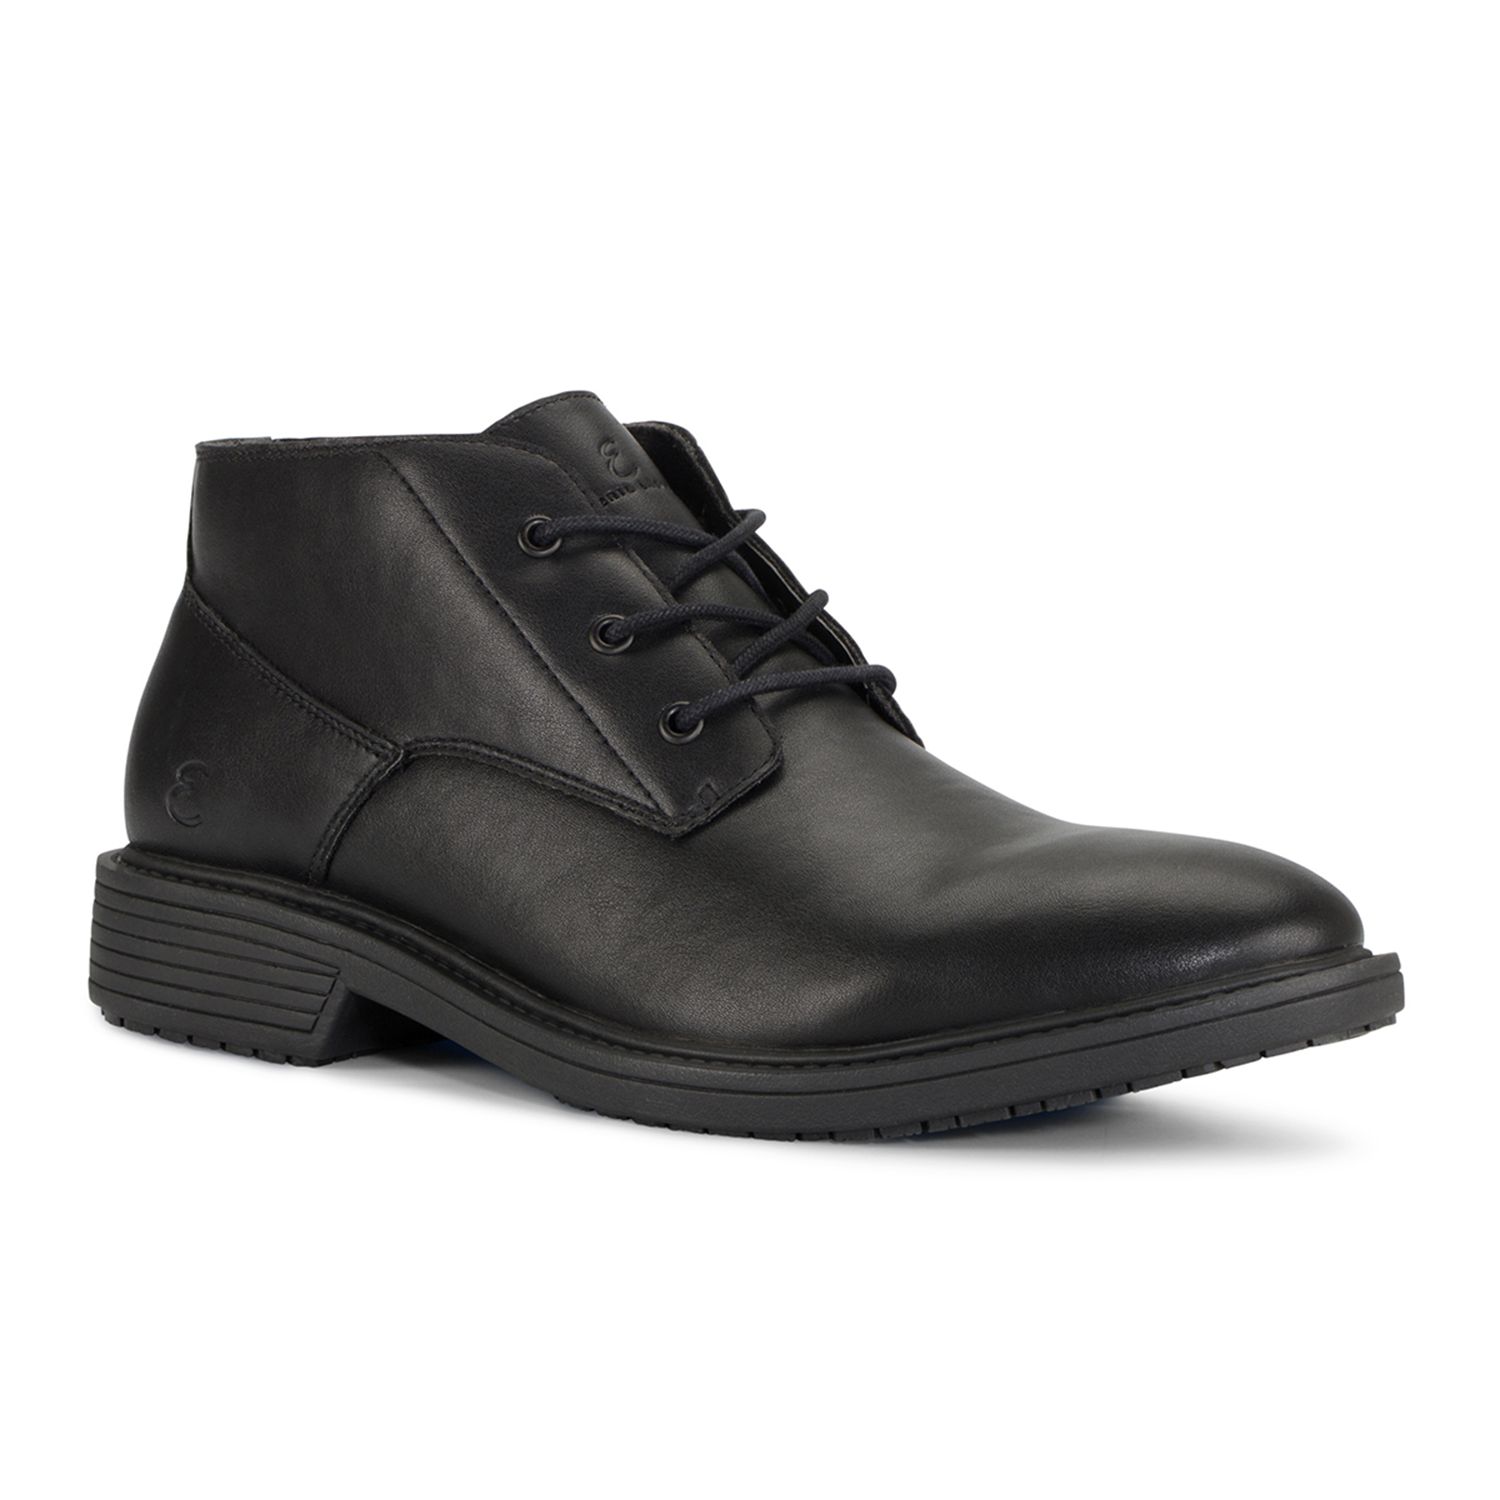 Water-Resistant Casual Dress Work Boots